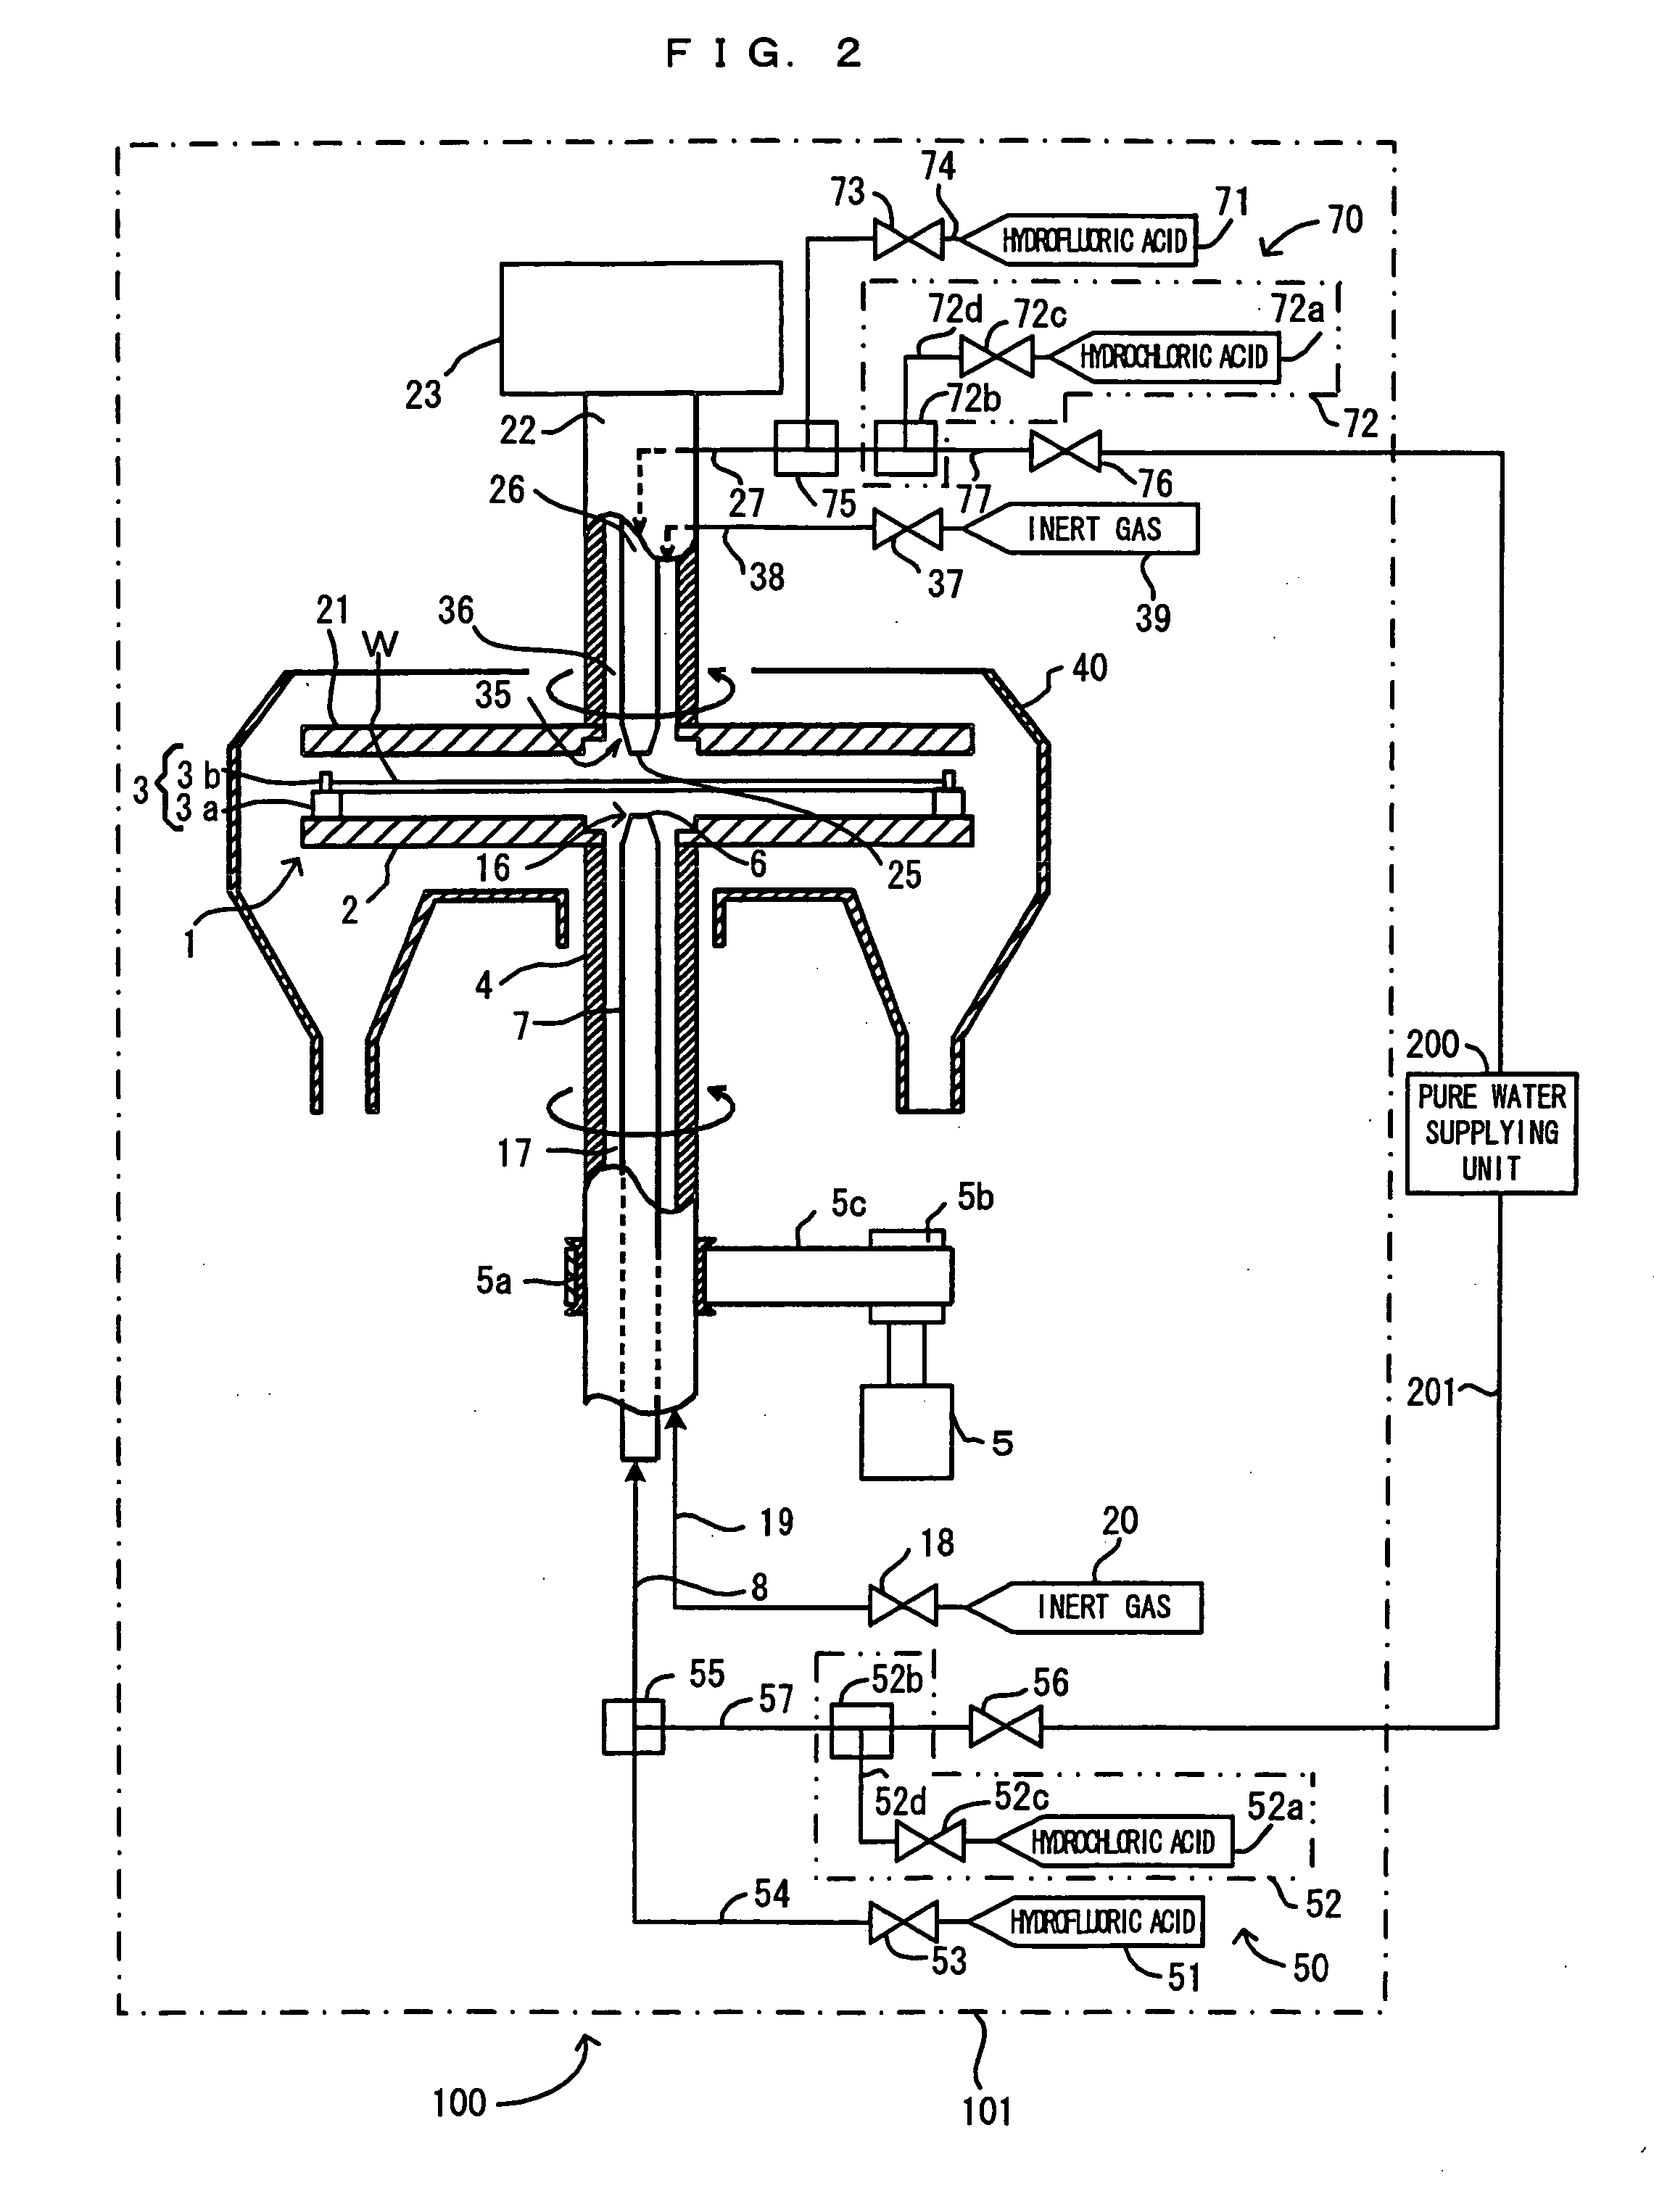 Method, apparatus and system for rinsing substrate with pH-adjusted rinse solution